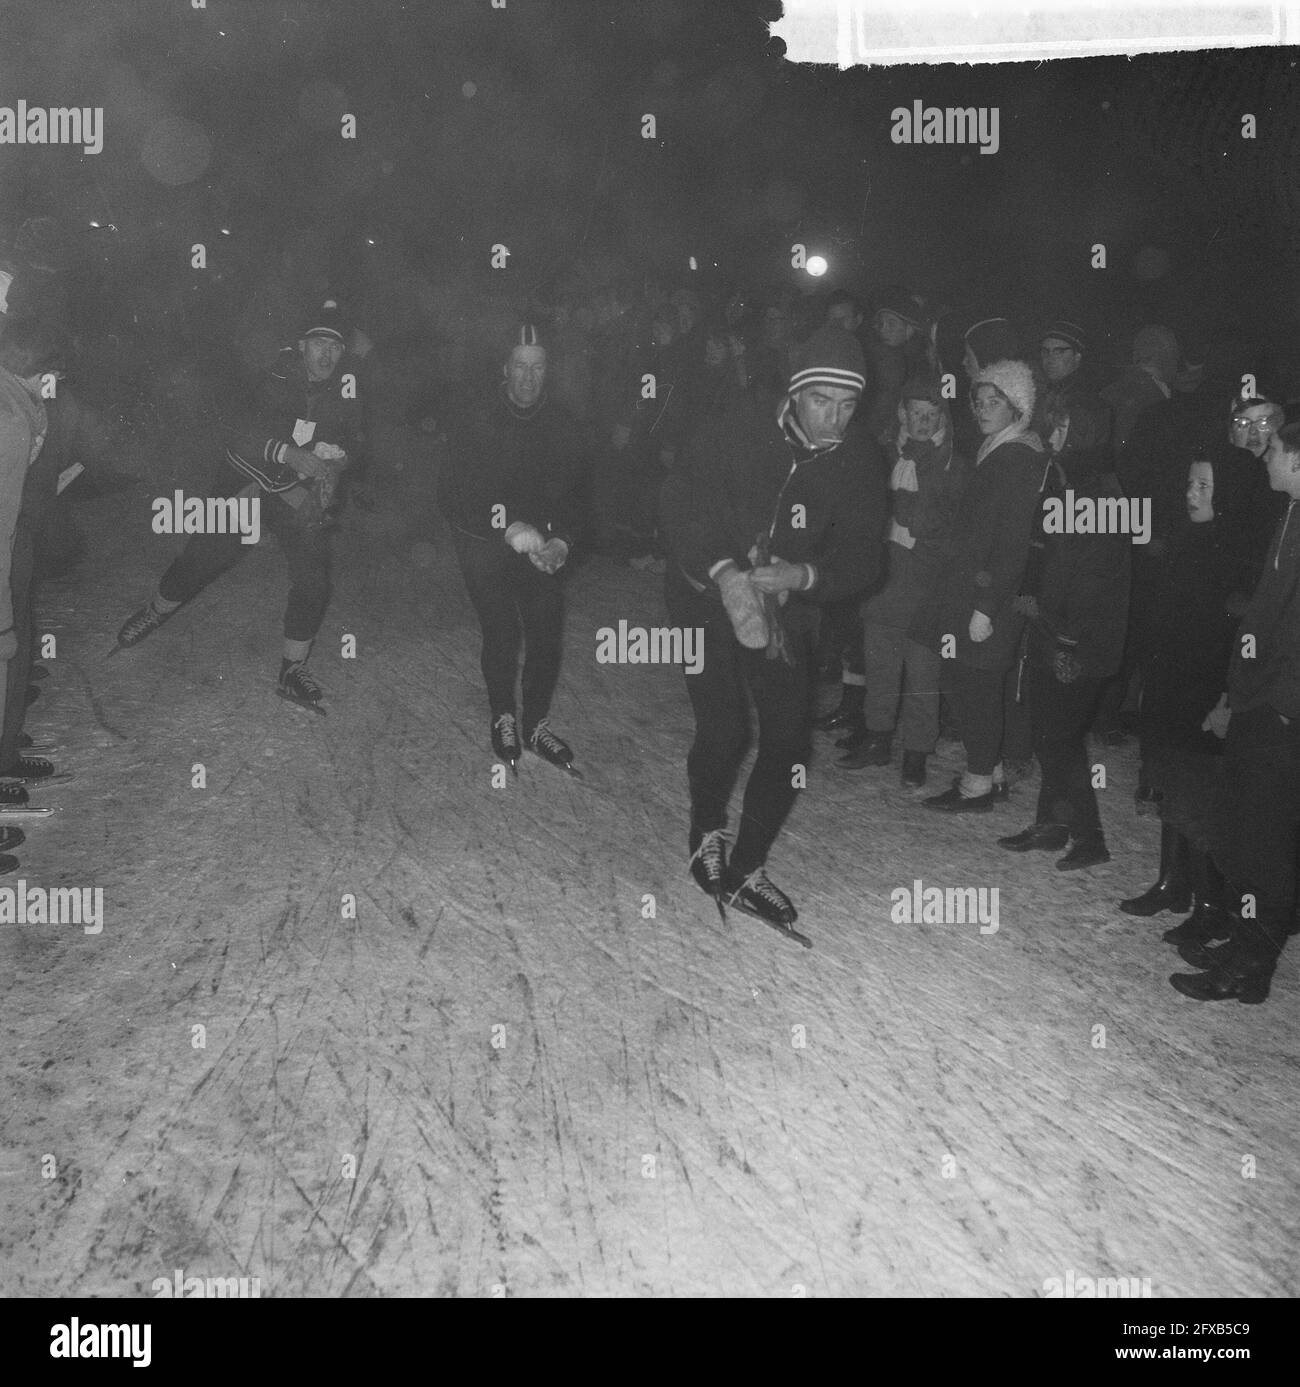 Elfstedentocht 1963. Participants on the ice after the start in Leeuwarden, 18 January 1963, skating, sports, The Netherlands, 20th century press agency photo, news to remember, documentary, historic photography 1945-1990, visual stories, human history of the Twentieth Century, capturing moments in time Stock Photo